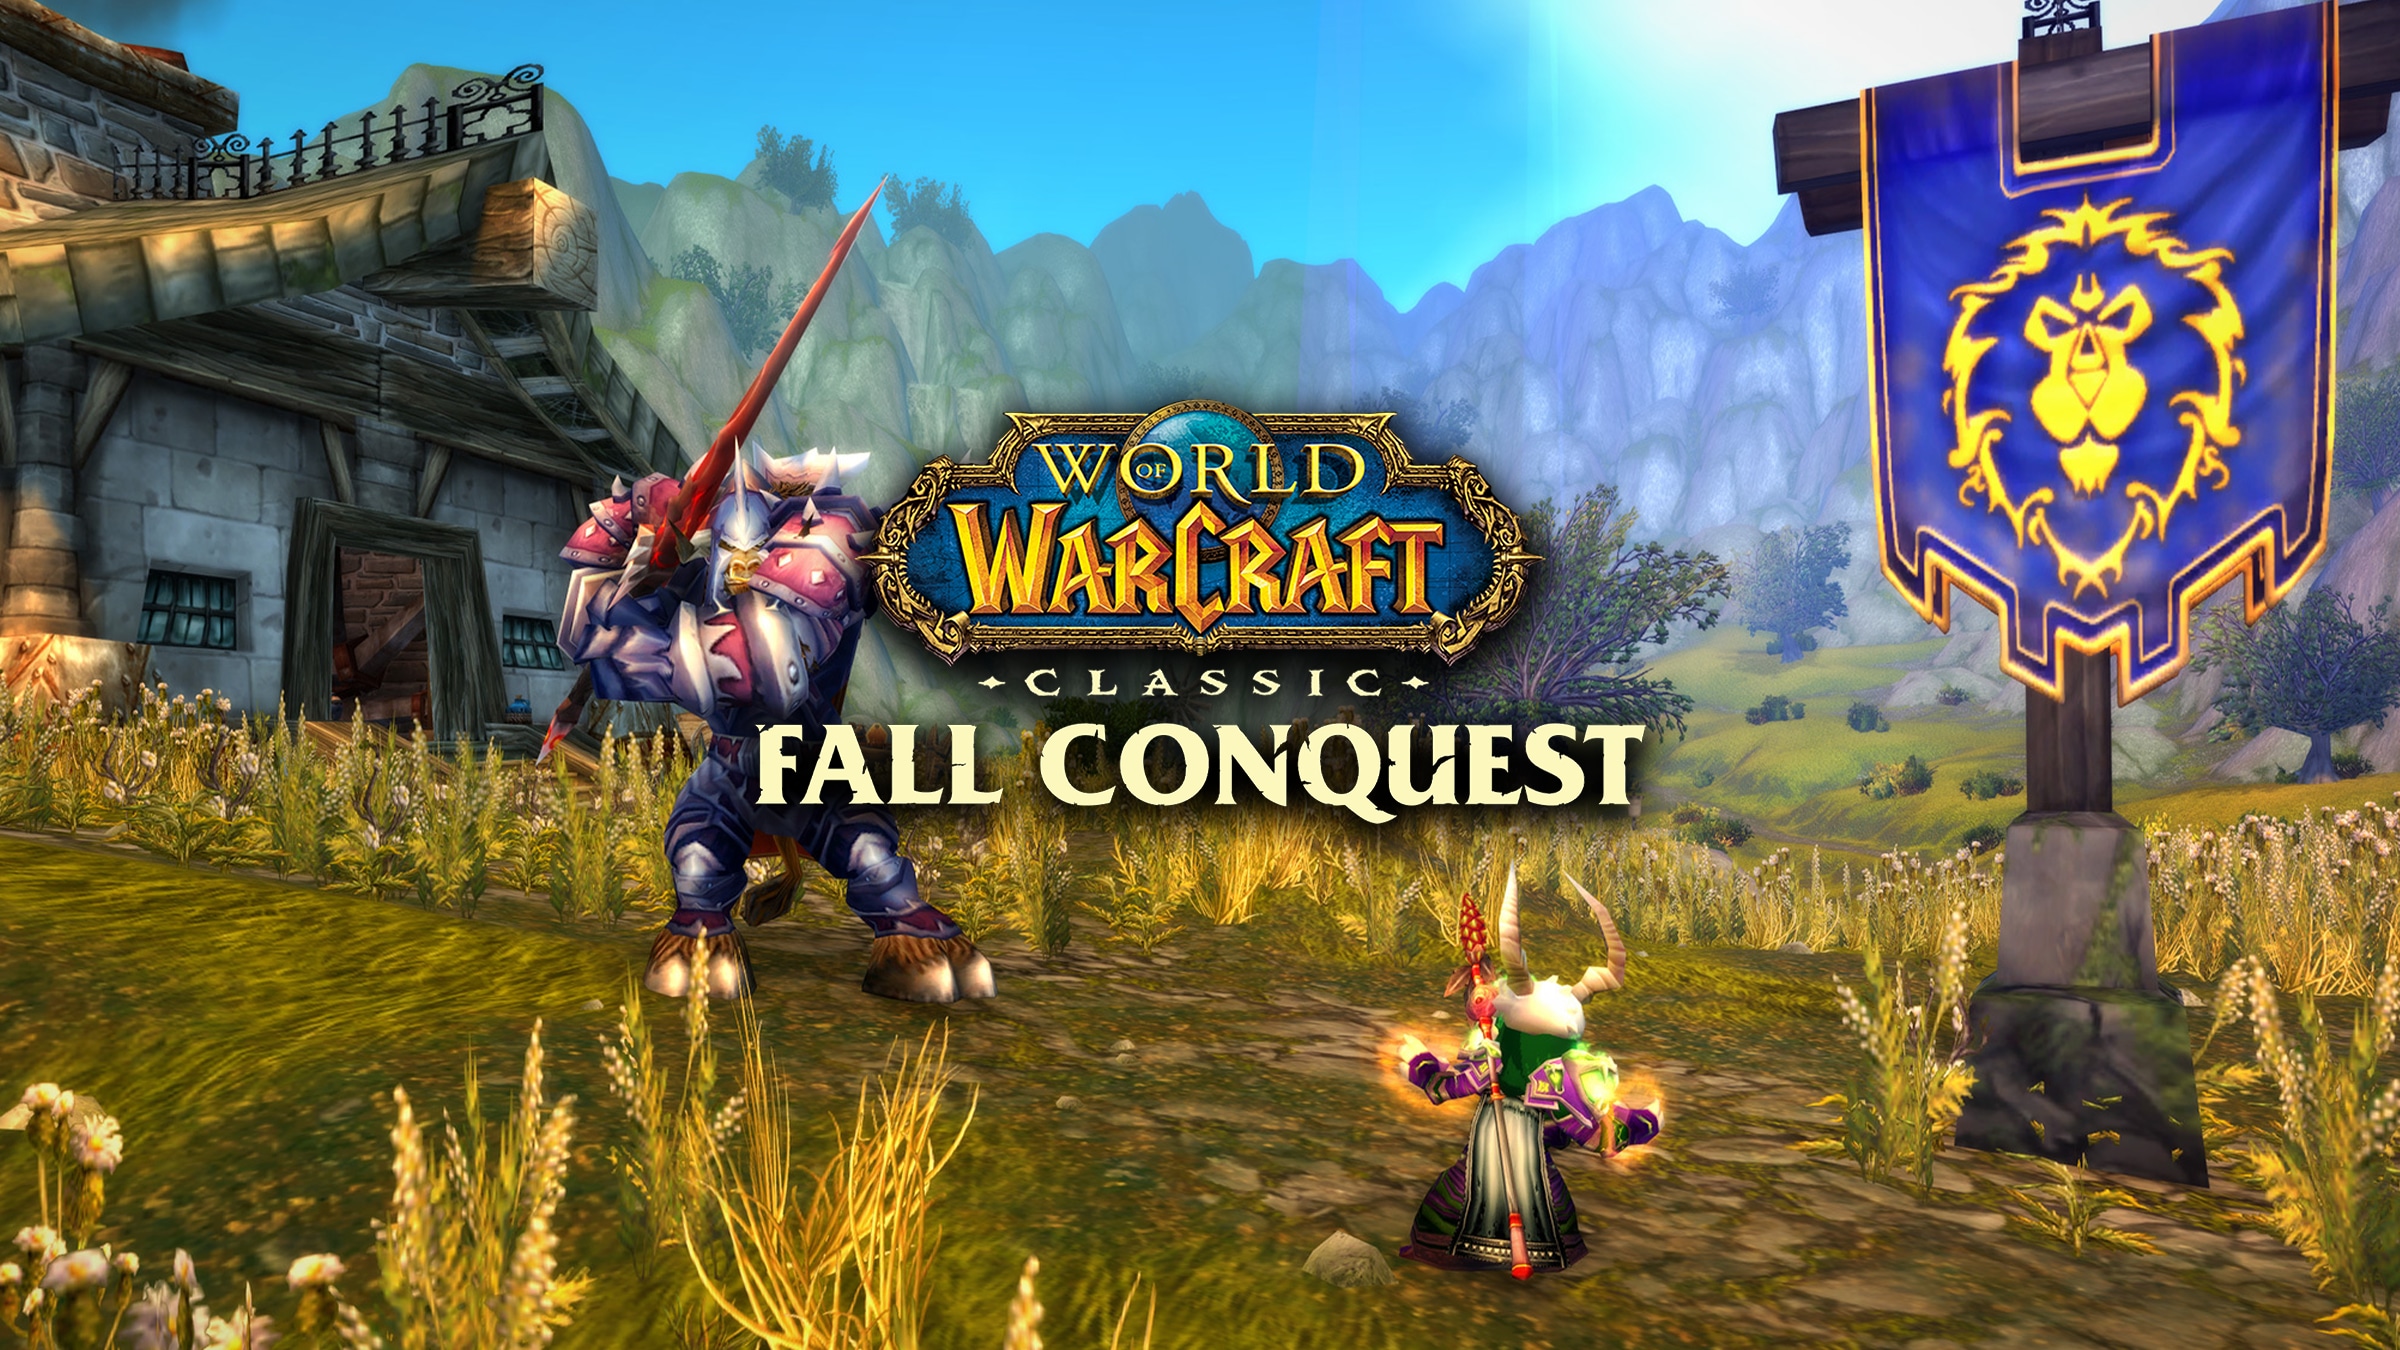 Introducing the World of Warcraft Classic Fall Conquest